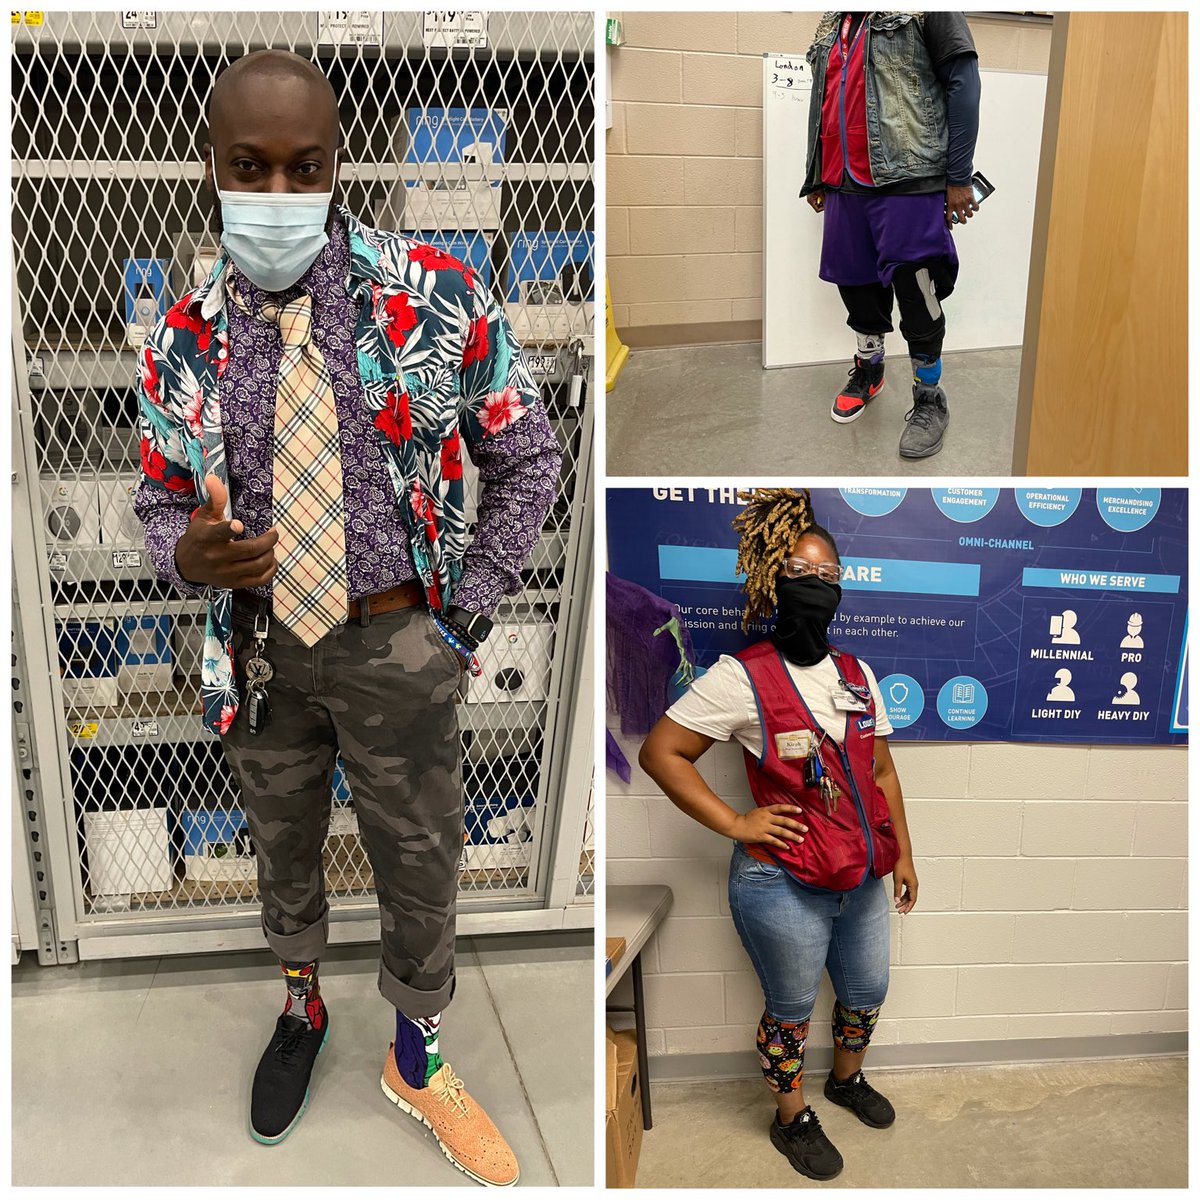 More from #WackyTackyDay here in DC! #MondayFunday ⁦@LowesDMV⁩ ⁦@GotoLowes⁩ ⁦@damianftaylor⁩ ⁦@BenitoKomadina⁩ #PositiveWorkEnvironment speed of the leader determines the speed of the team.